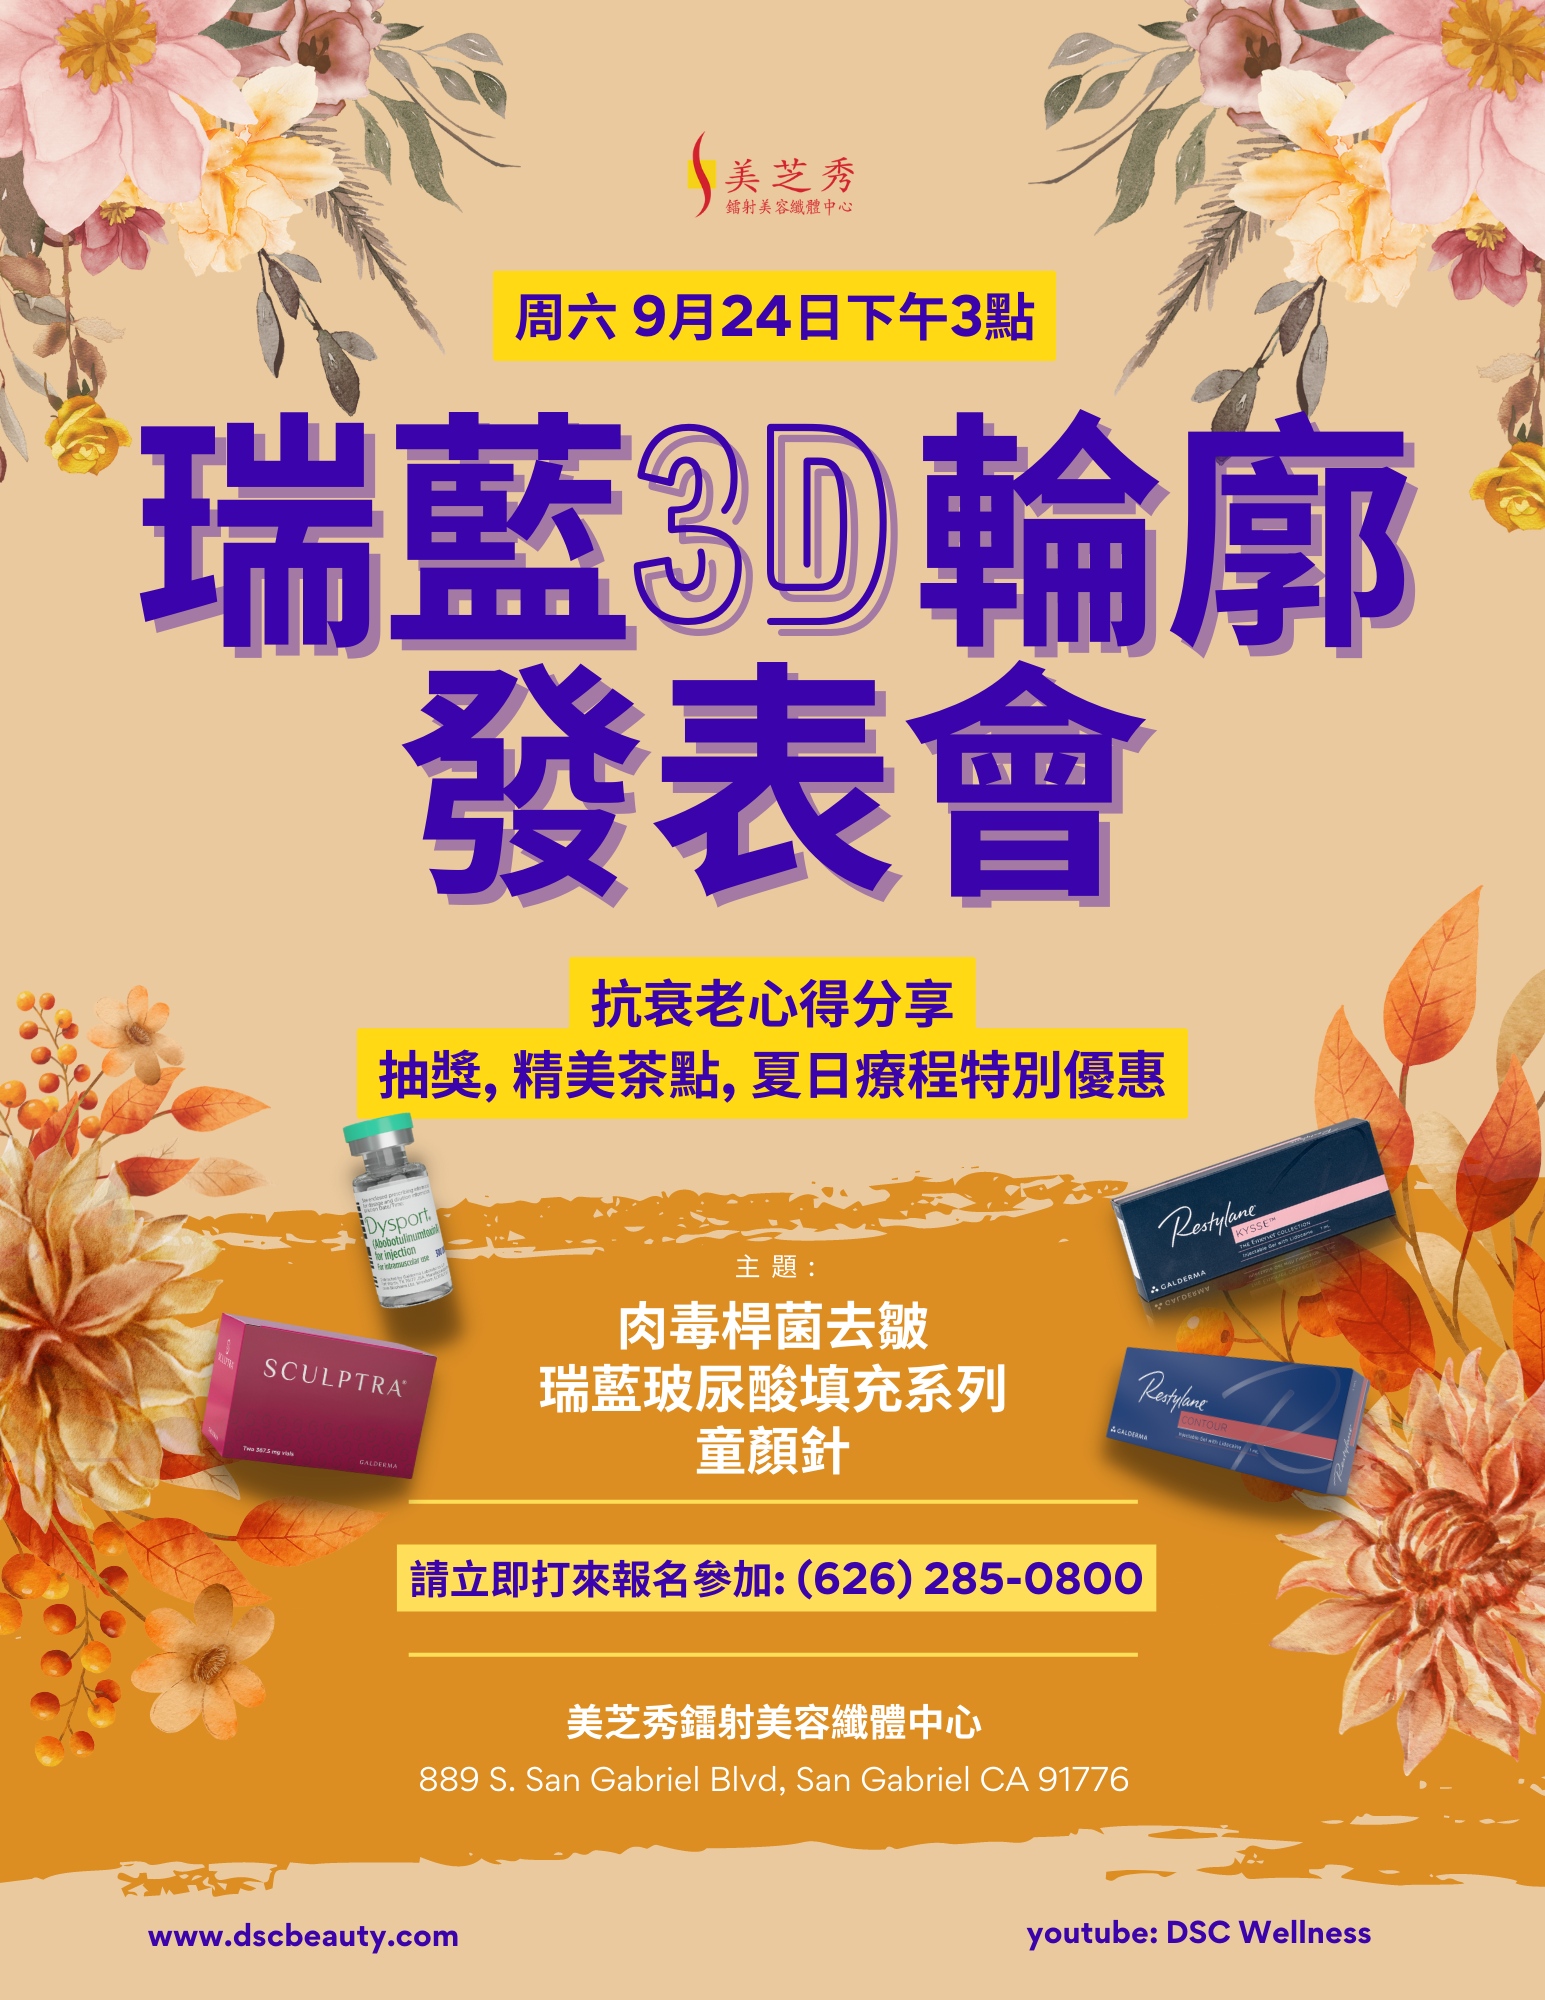 Galderma Injectables Event Saturday 9/24/22 3PM Chinese Flyer